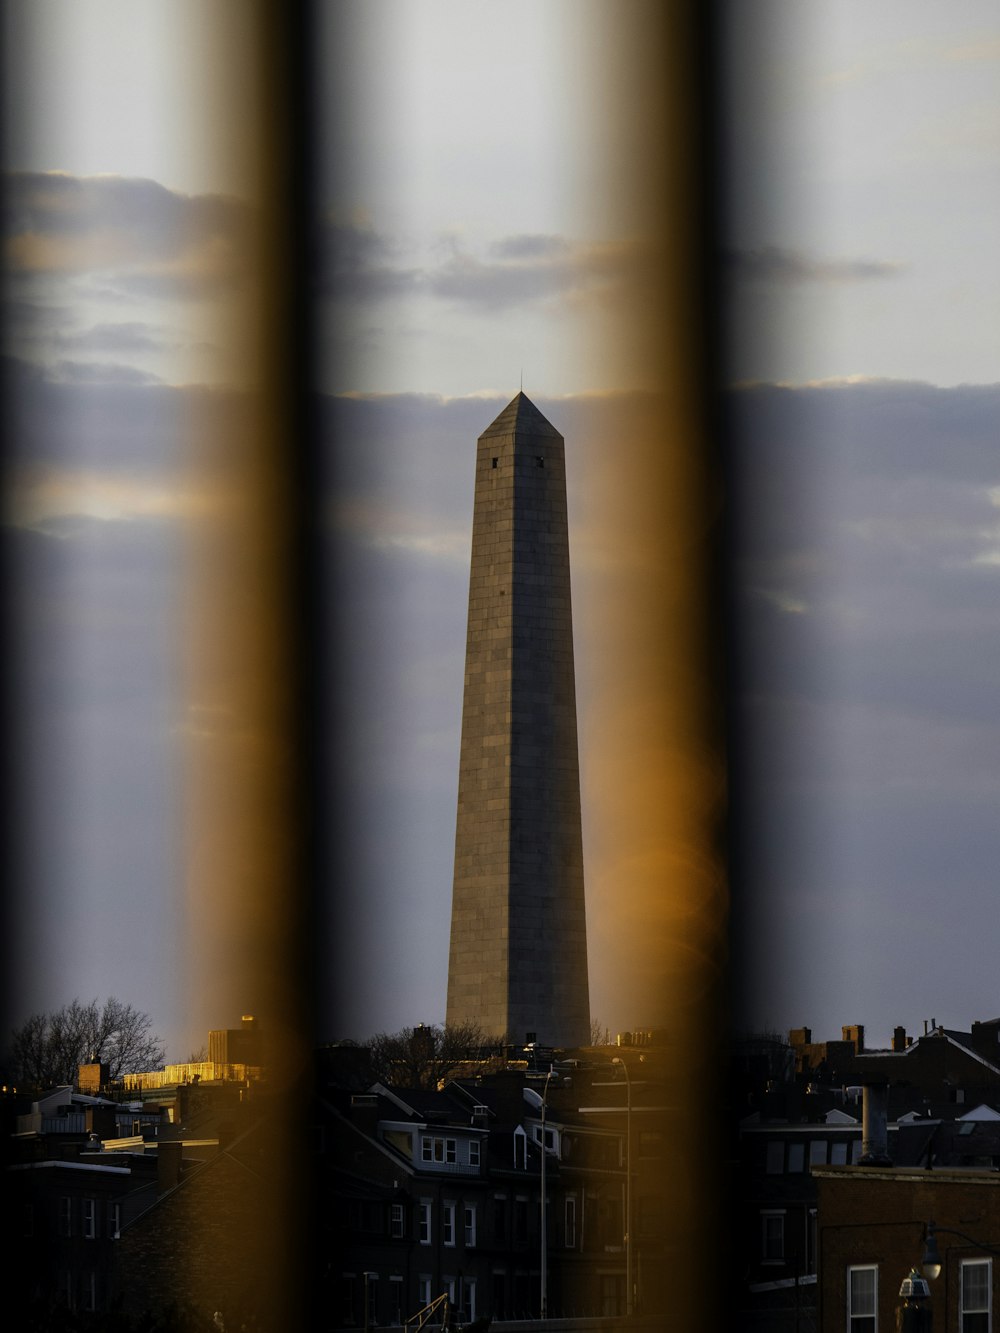 a view of the washington monument through a fence